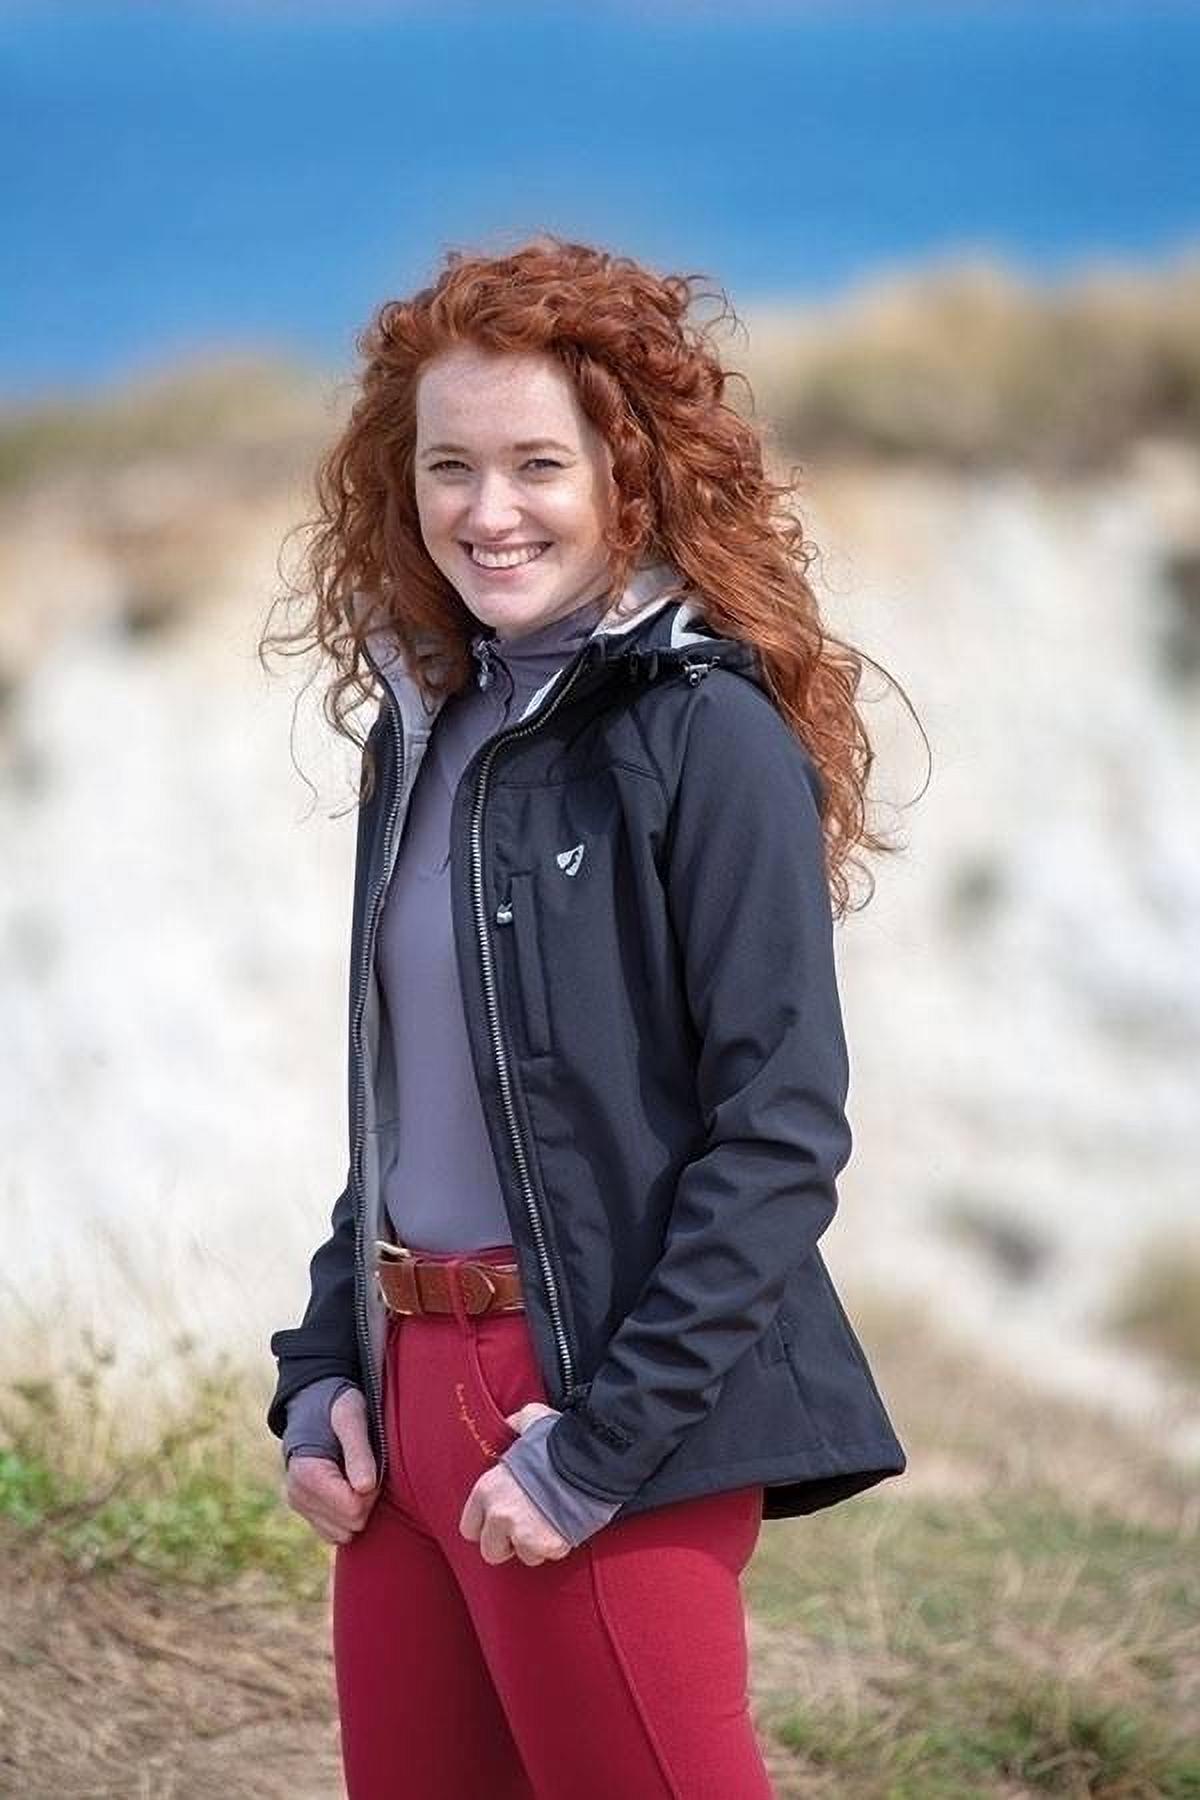 Shires Aubrion Ladies Foresta Softshell Jacket - image 1 of 1